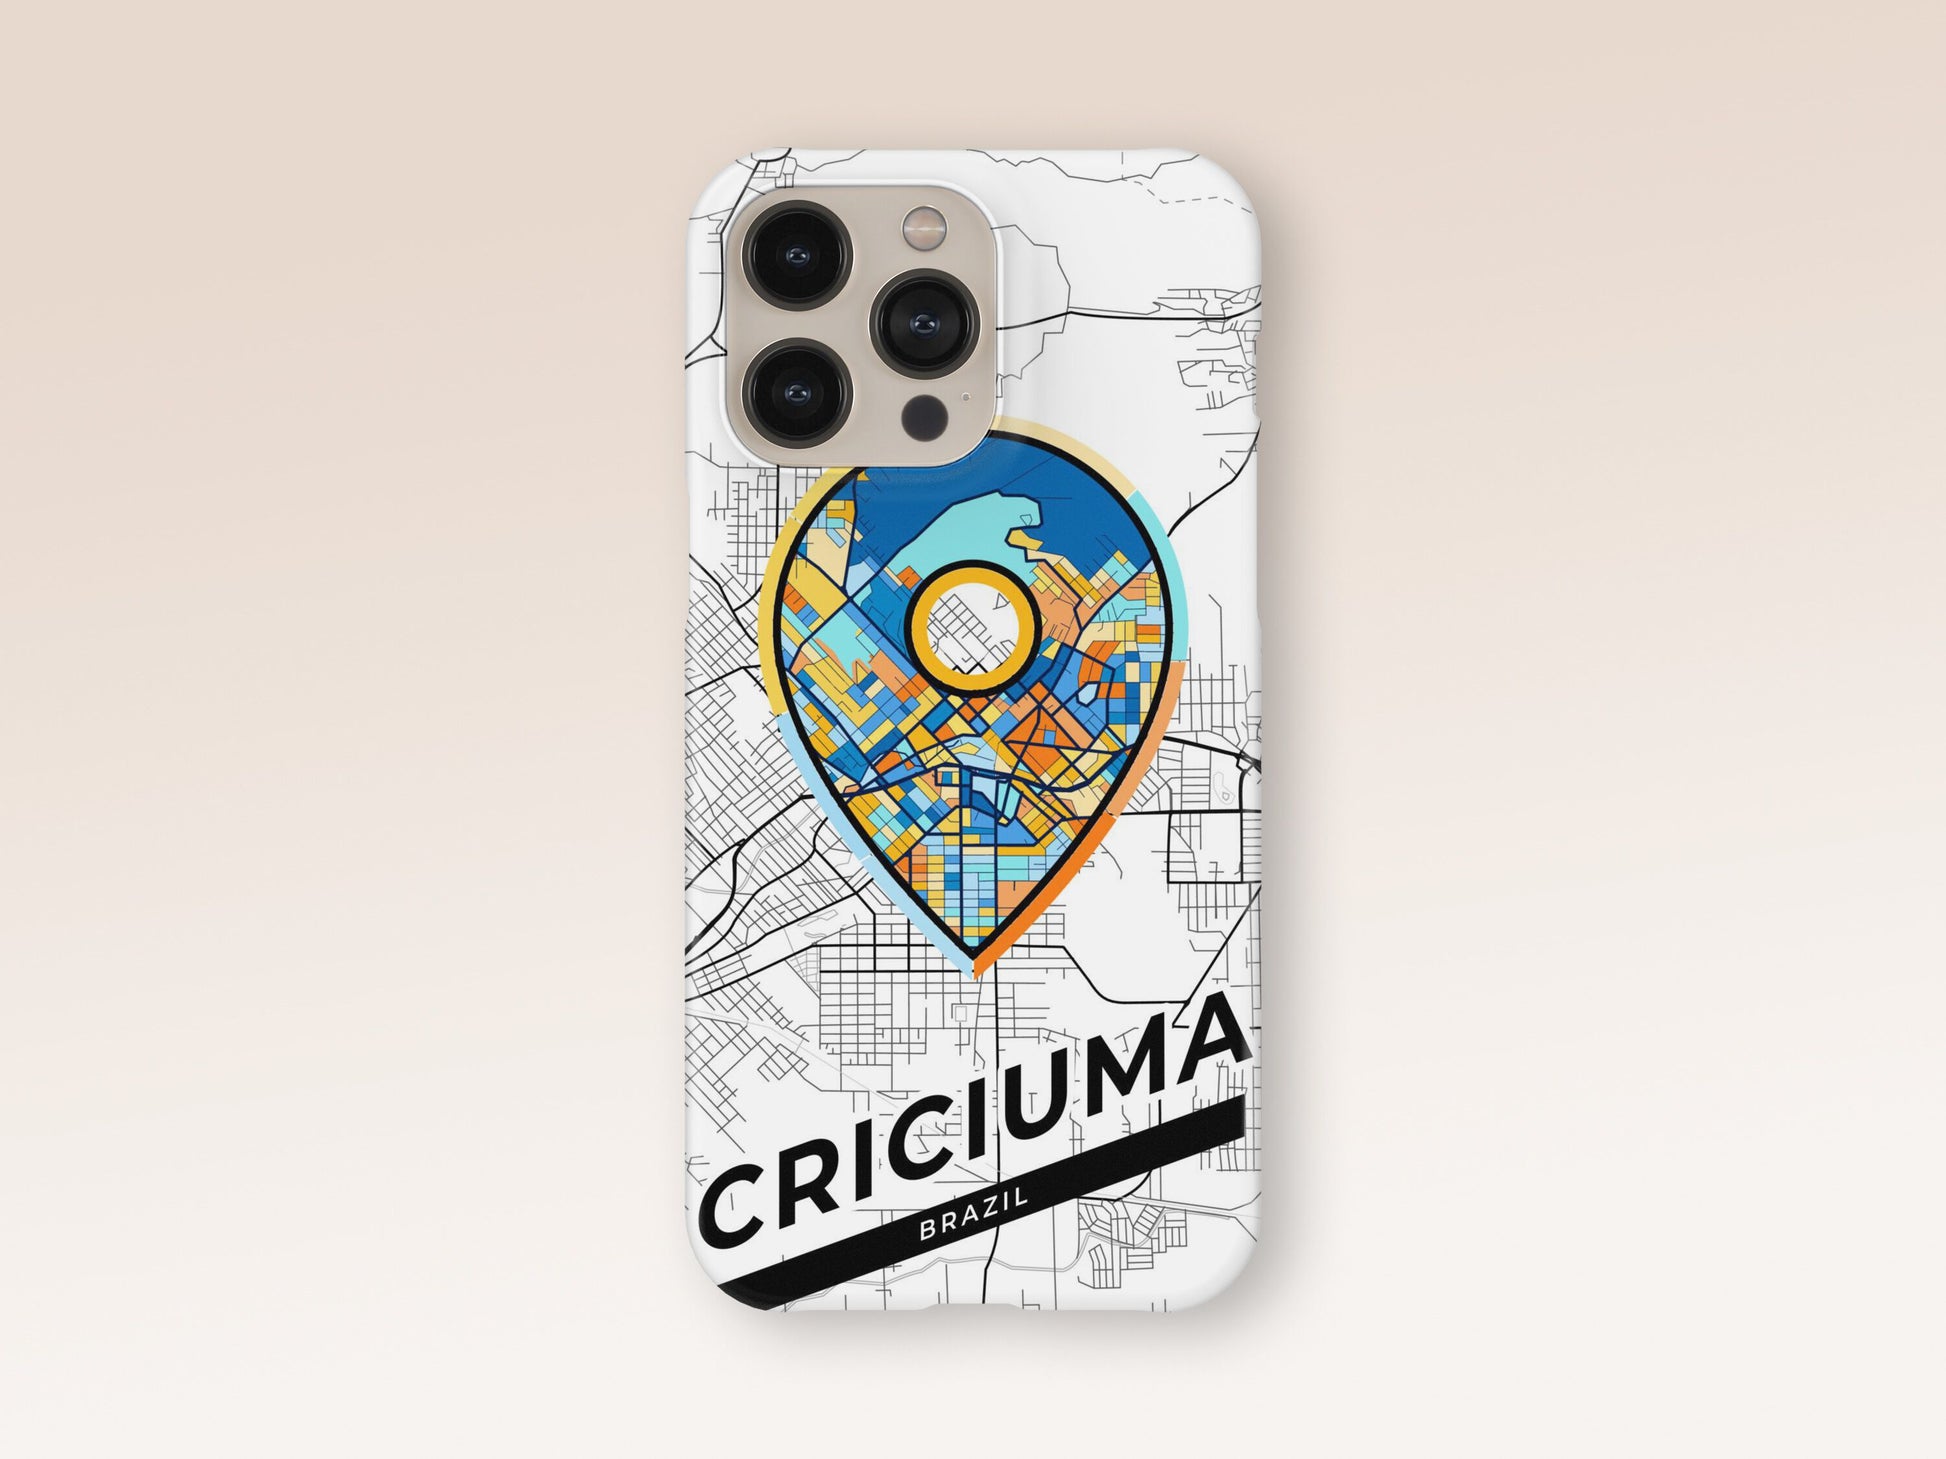 Criciuma Brazil slim phone case with colorful icon. Birthday, wedding or housewarming gift. Couple match cases. 1